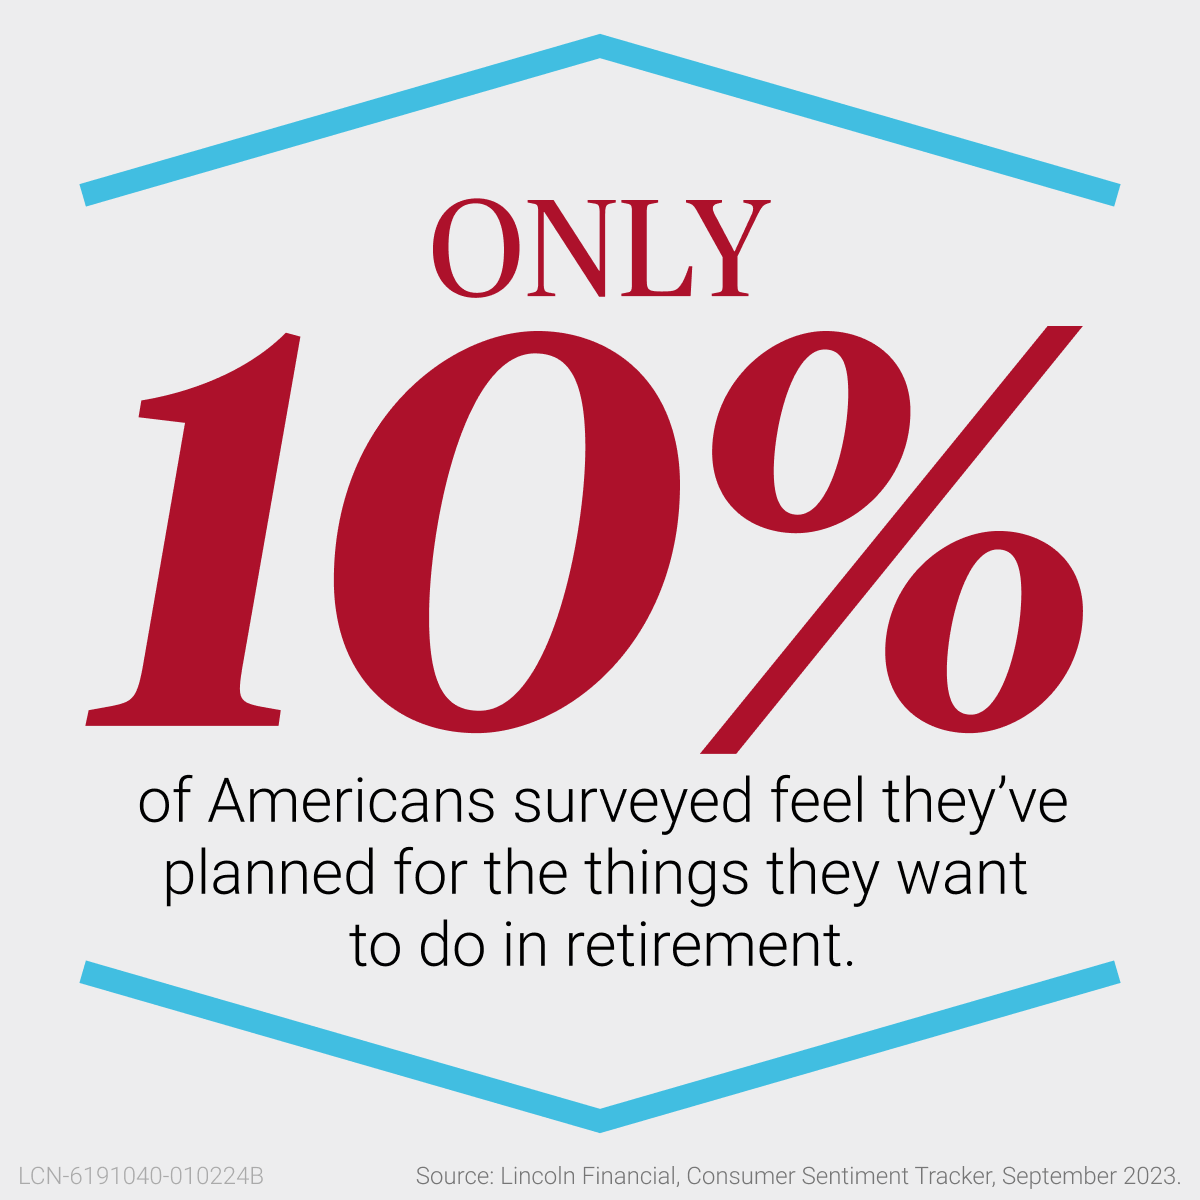 Only 10% of Americans surveyed feel they've planned for the things they want to do in retirement